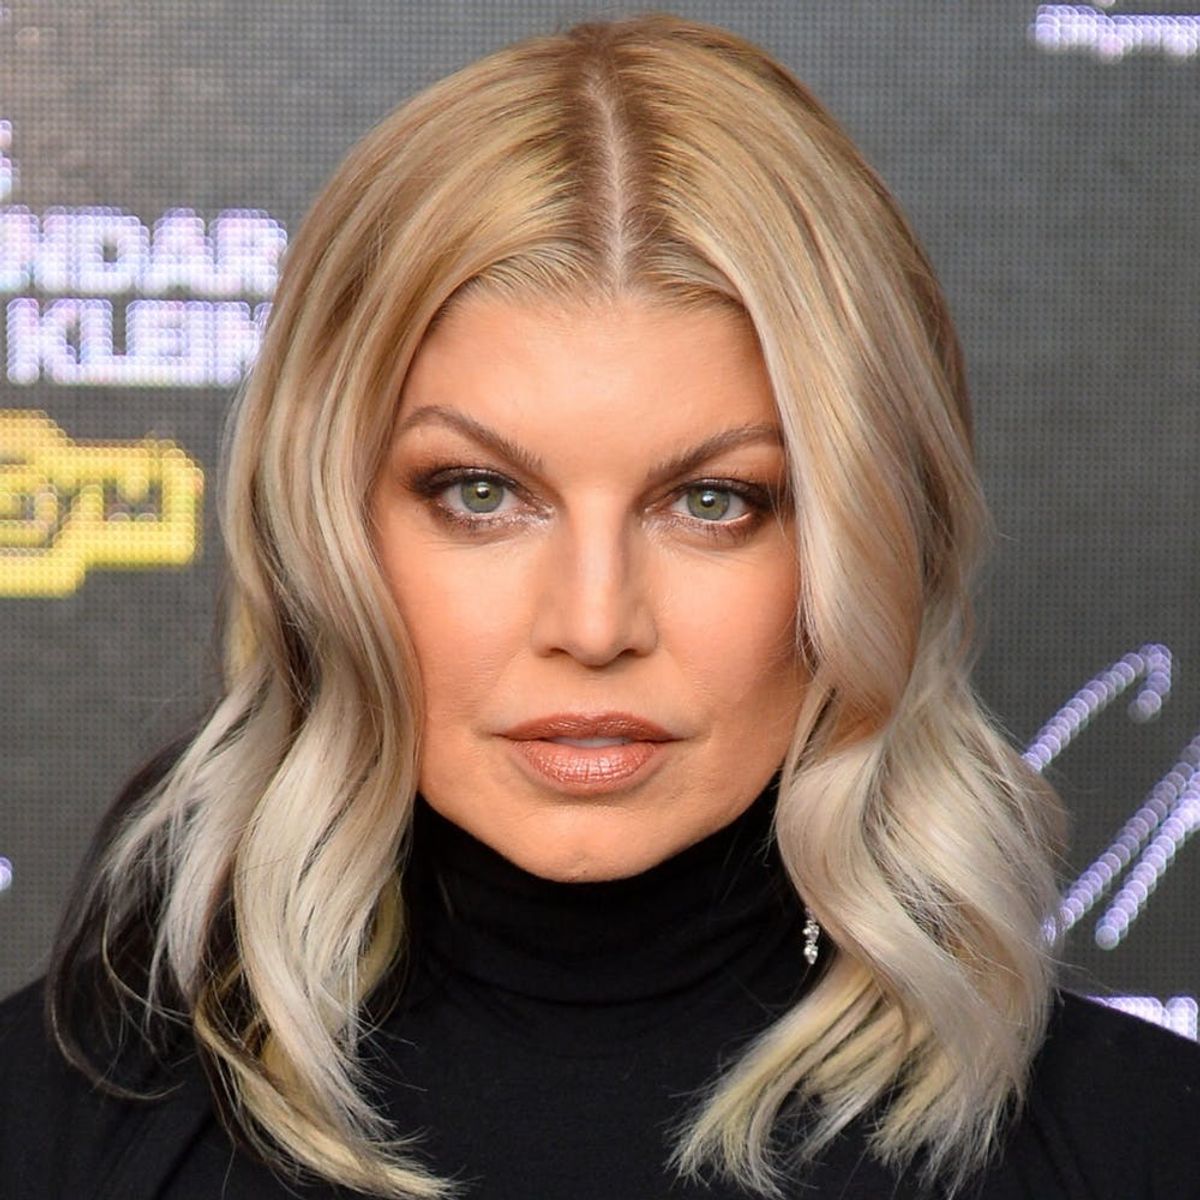 Fergie Is Rocking a Goth New Look Complete With Raven Locks